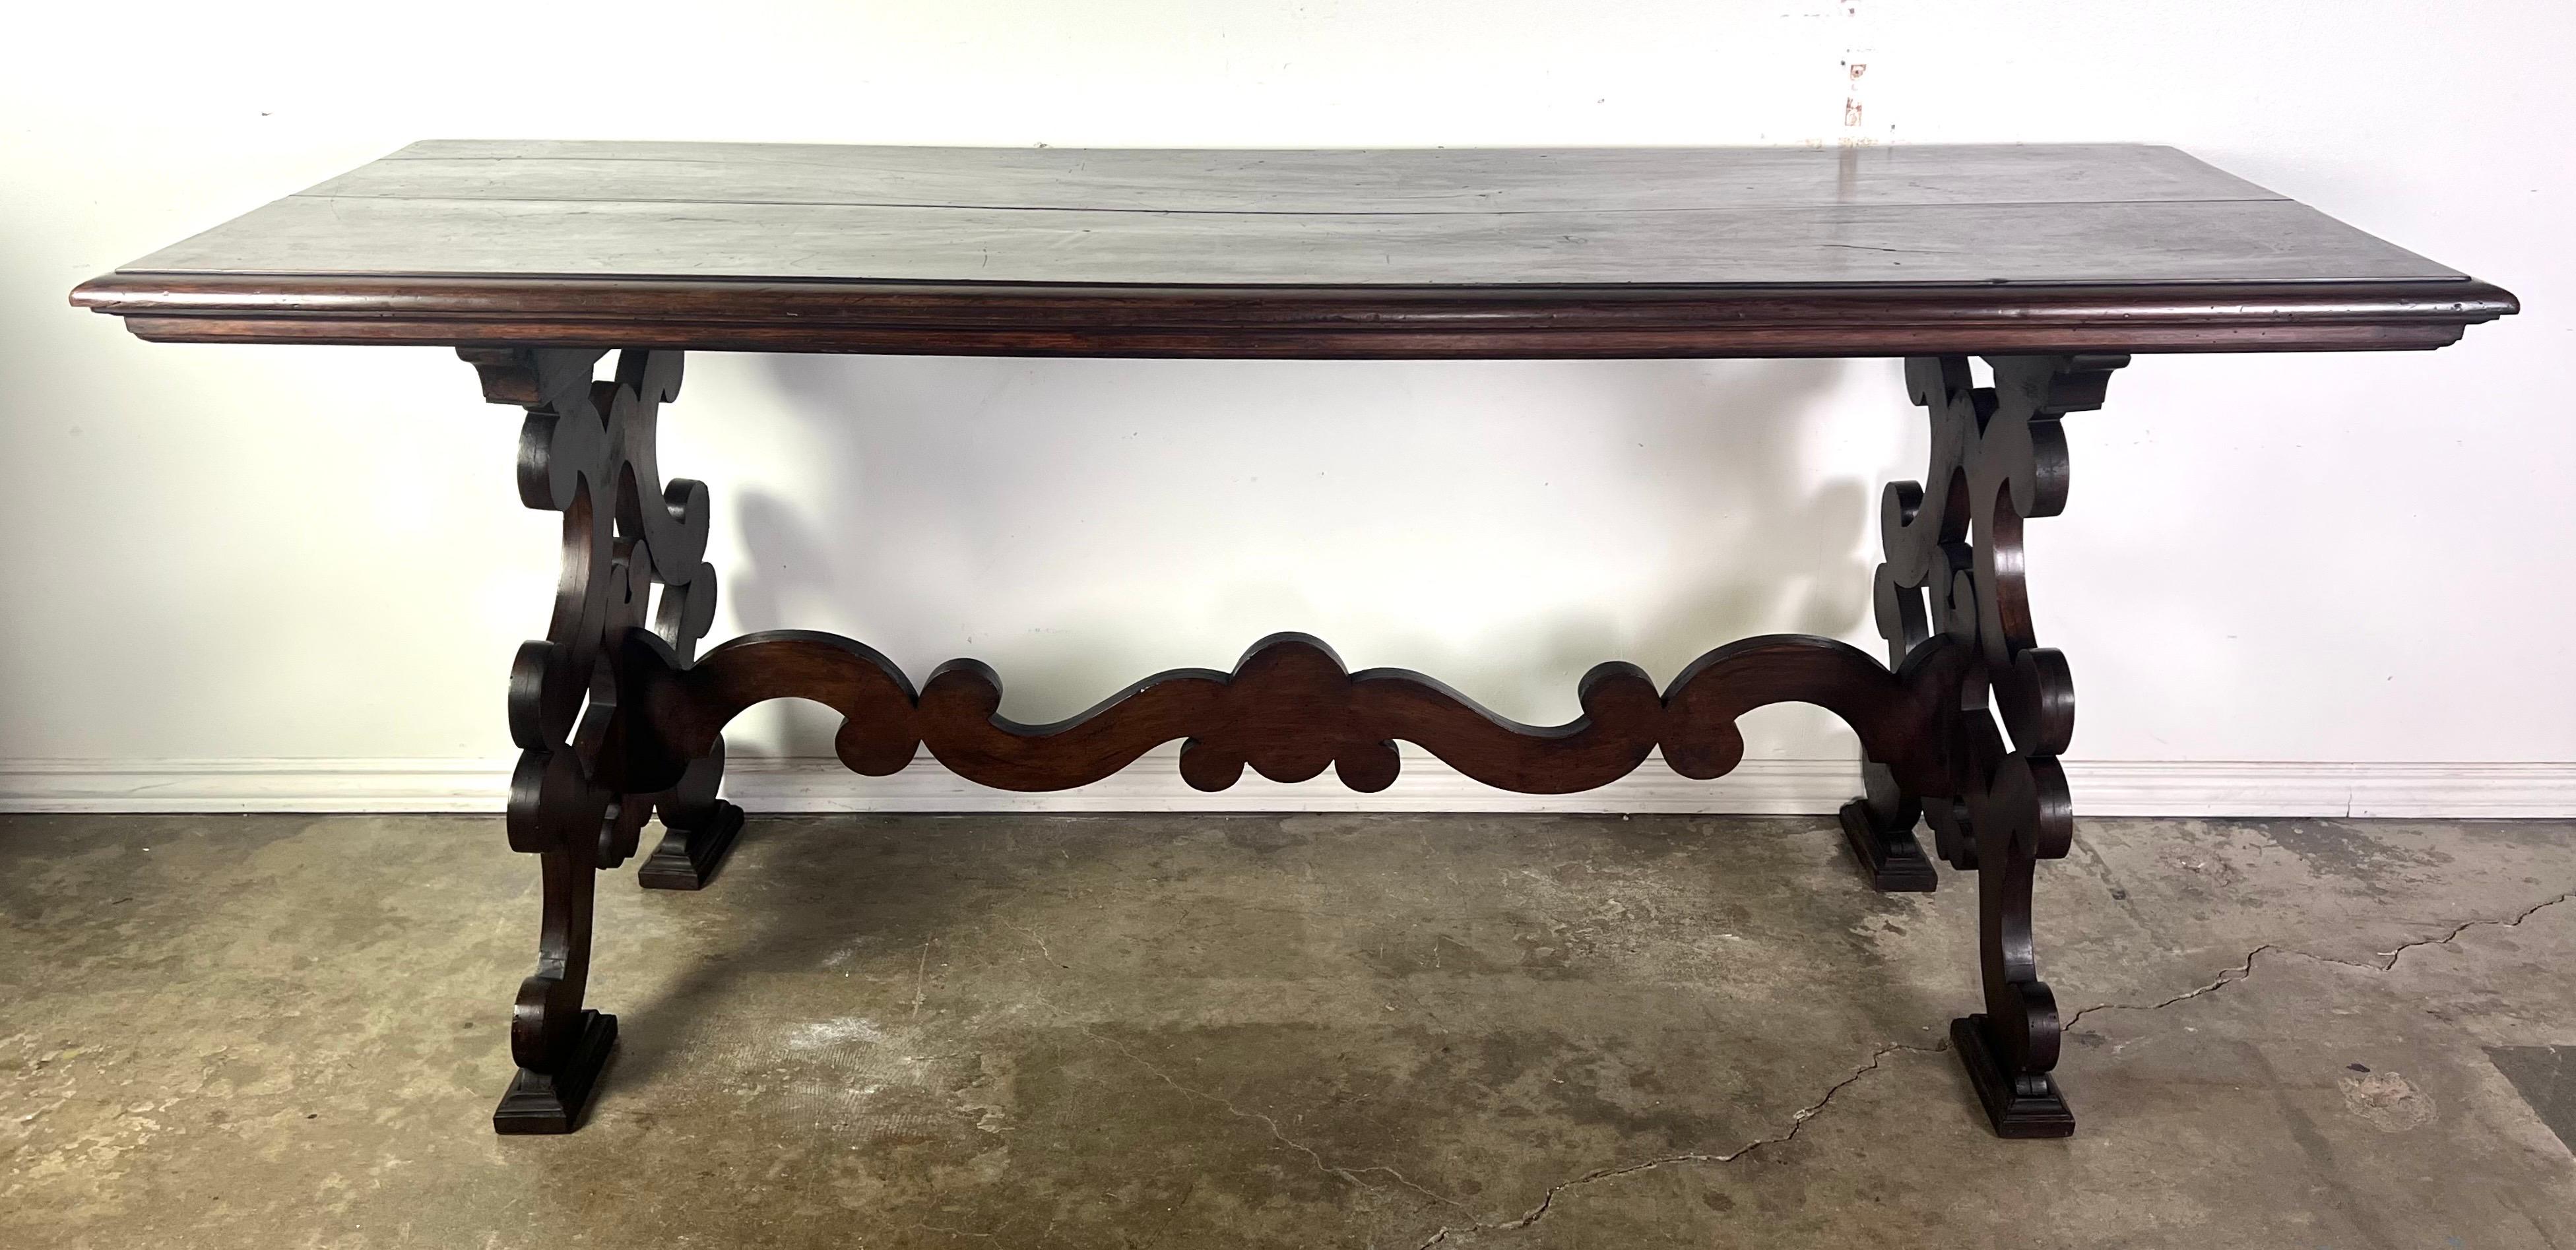 19th-century Italian Baroque style console table, standing on two pedestals made from scrolls and connected by a center stretcher in a coordinating motif, represents a dramatic and ornate piece characteristic of the Baroque period.  Crafted from